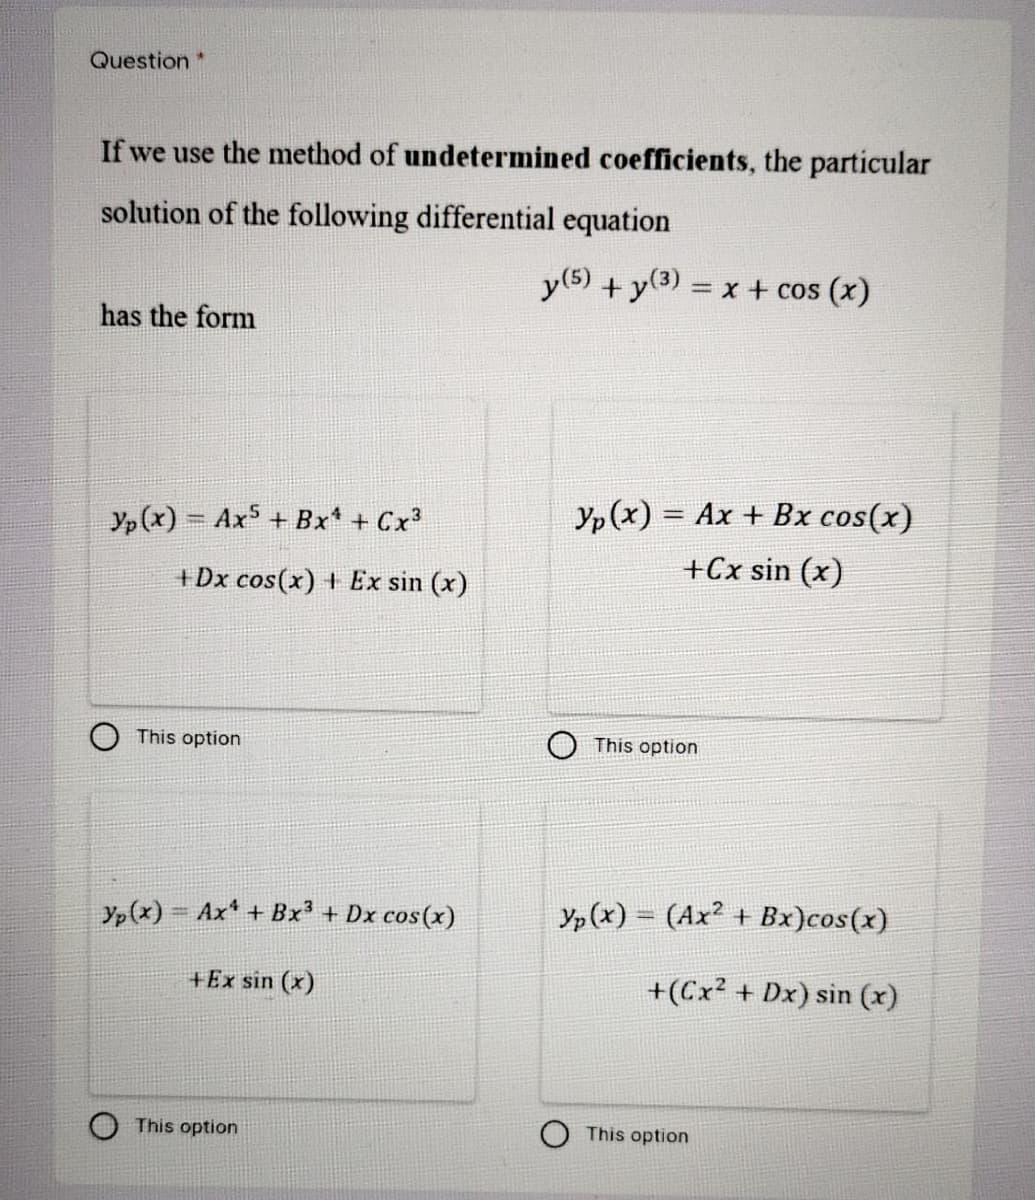 Question*
If we use the method of undetermined coefficients, the particular
solution of the following differential equation
y(5) + y(3).
= x + cos (x)
has the form
Yp(x) = Ax + Bx + Cx
Yp (x) = Ax + Bx cos(x)
+Cx sin (x)
+Dx cos(x) + Ex sin (x)
This option
This option
Yp(x) Ax + Bx³ + Dx cos(x)
Yp(x) = (Ax² + Bx)cos(x)
+Ex sin (x)
+(Cx? + Dx) sin (x)
This option
This option
